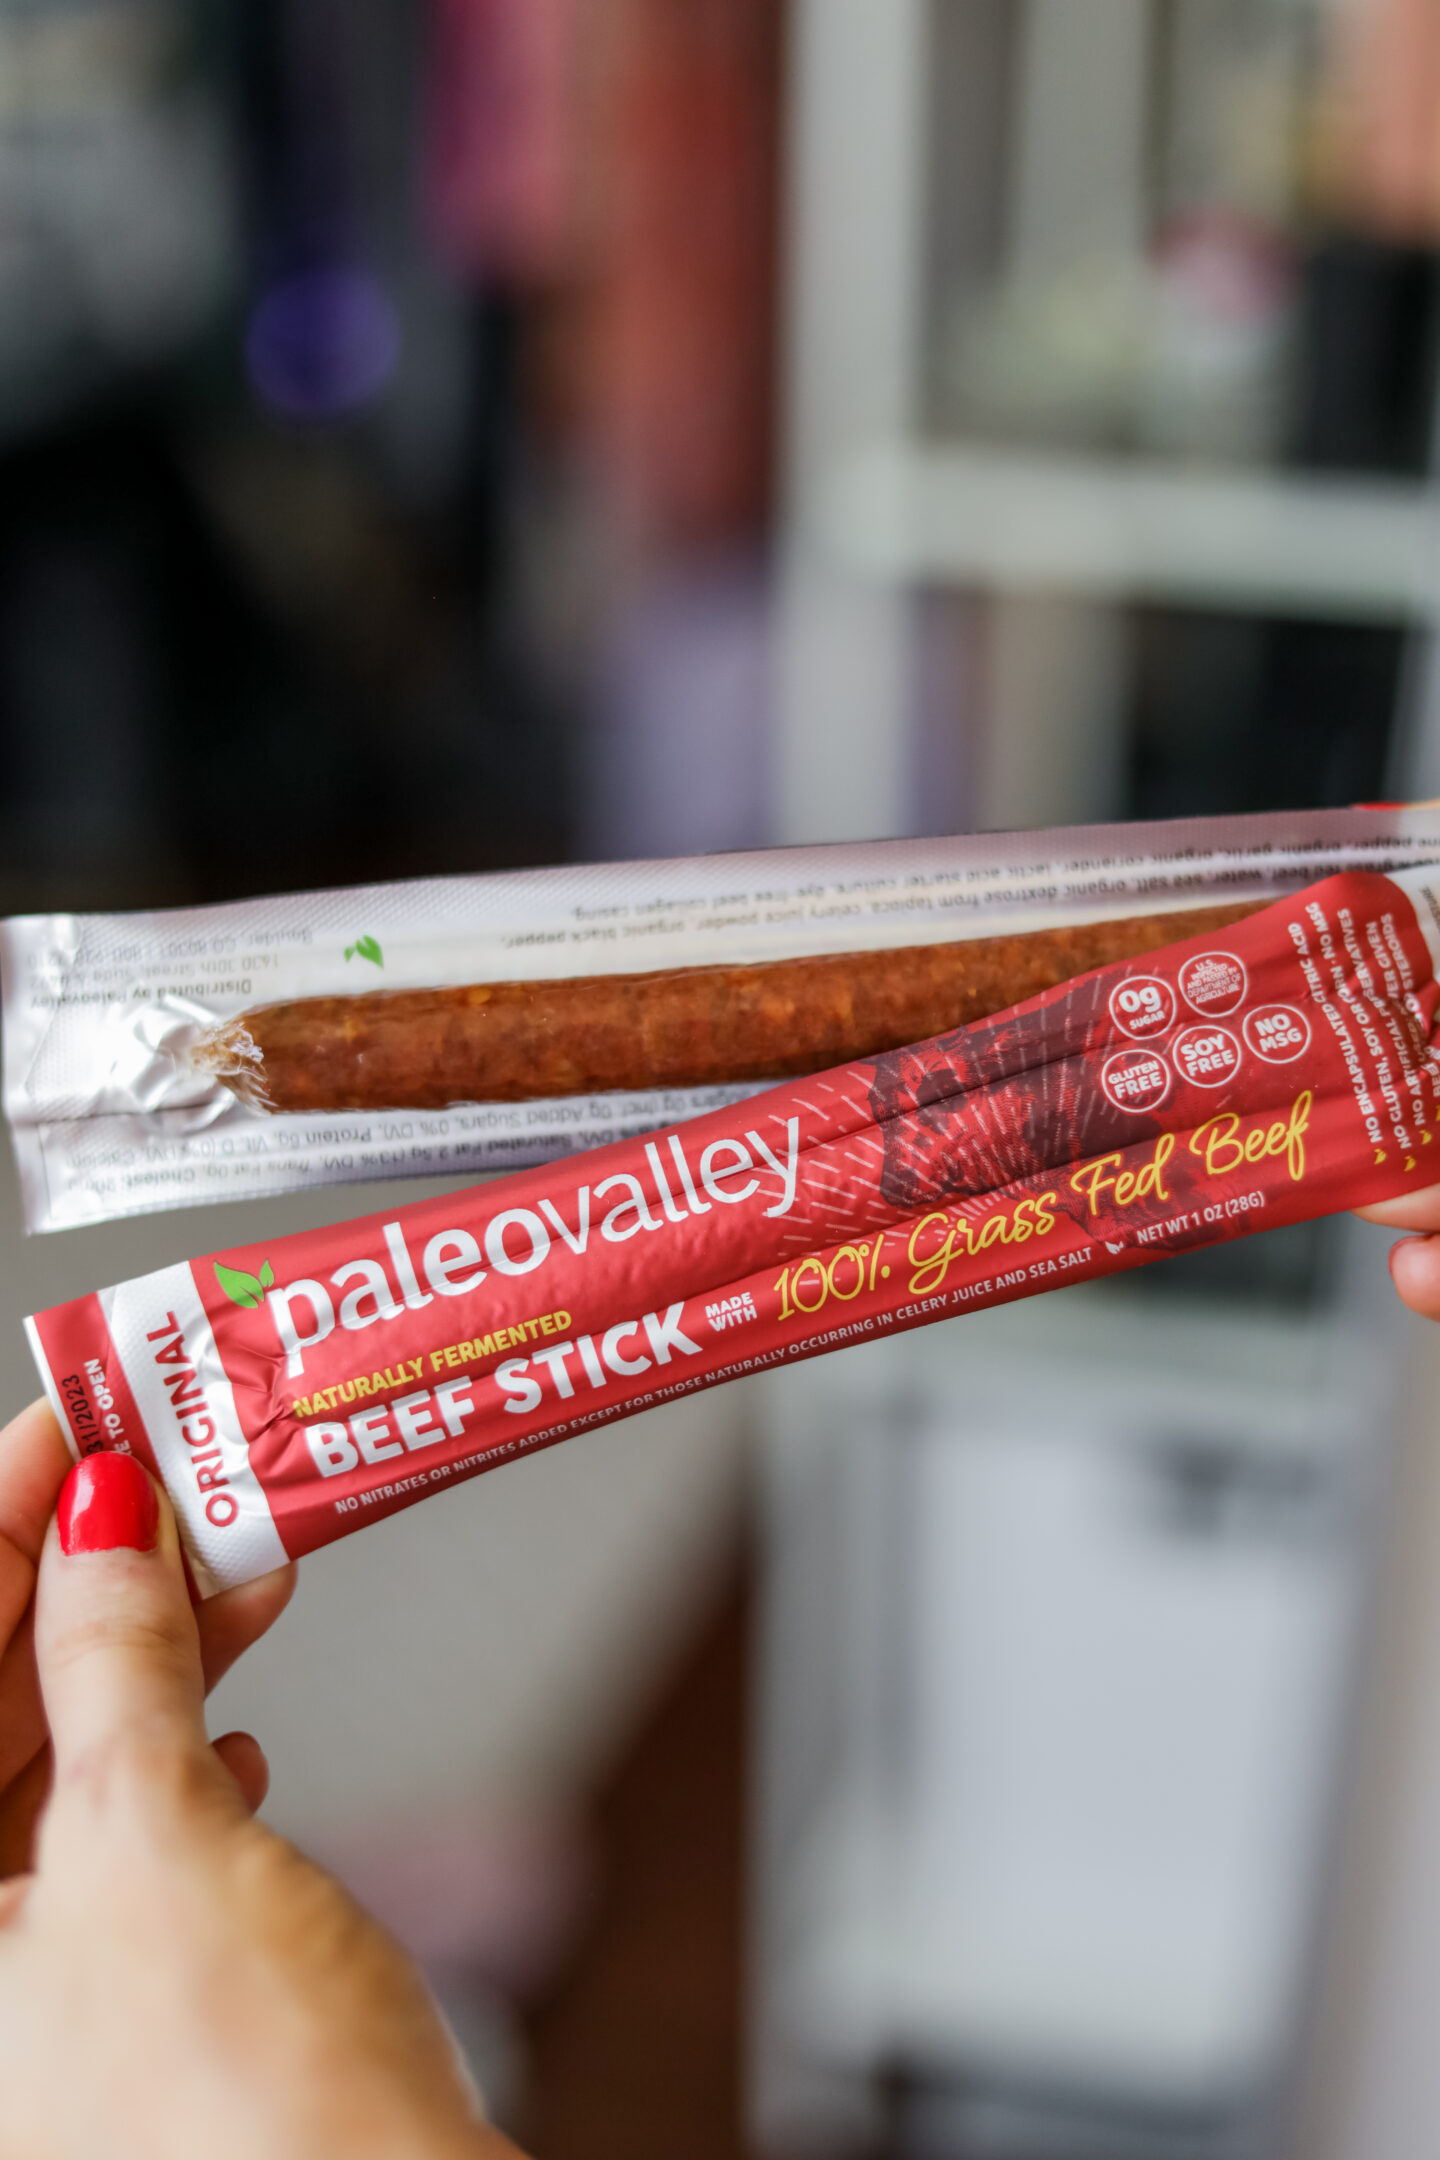 Paleo beef sticks Amazon - Cool Sh*t I Lovelovelove, Monthly Favorites on Coming Up Roses